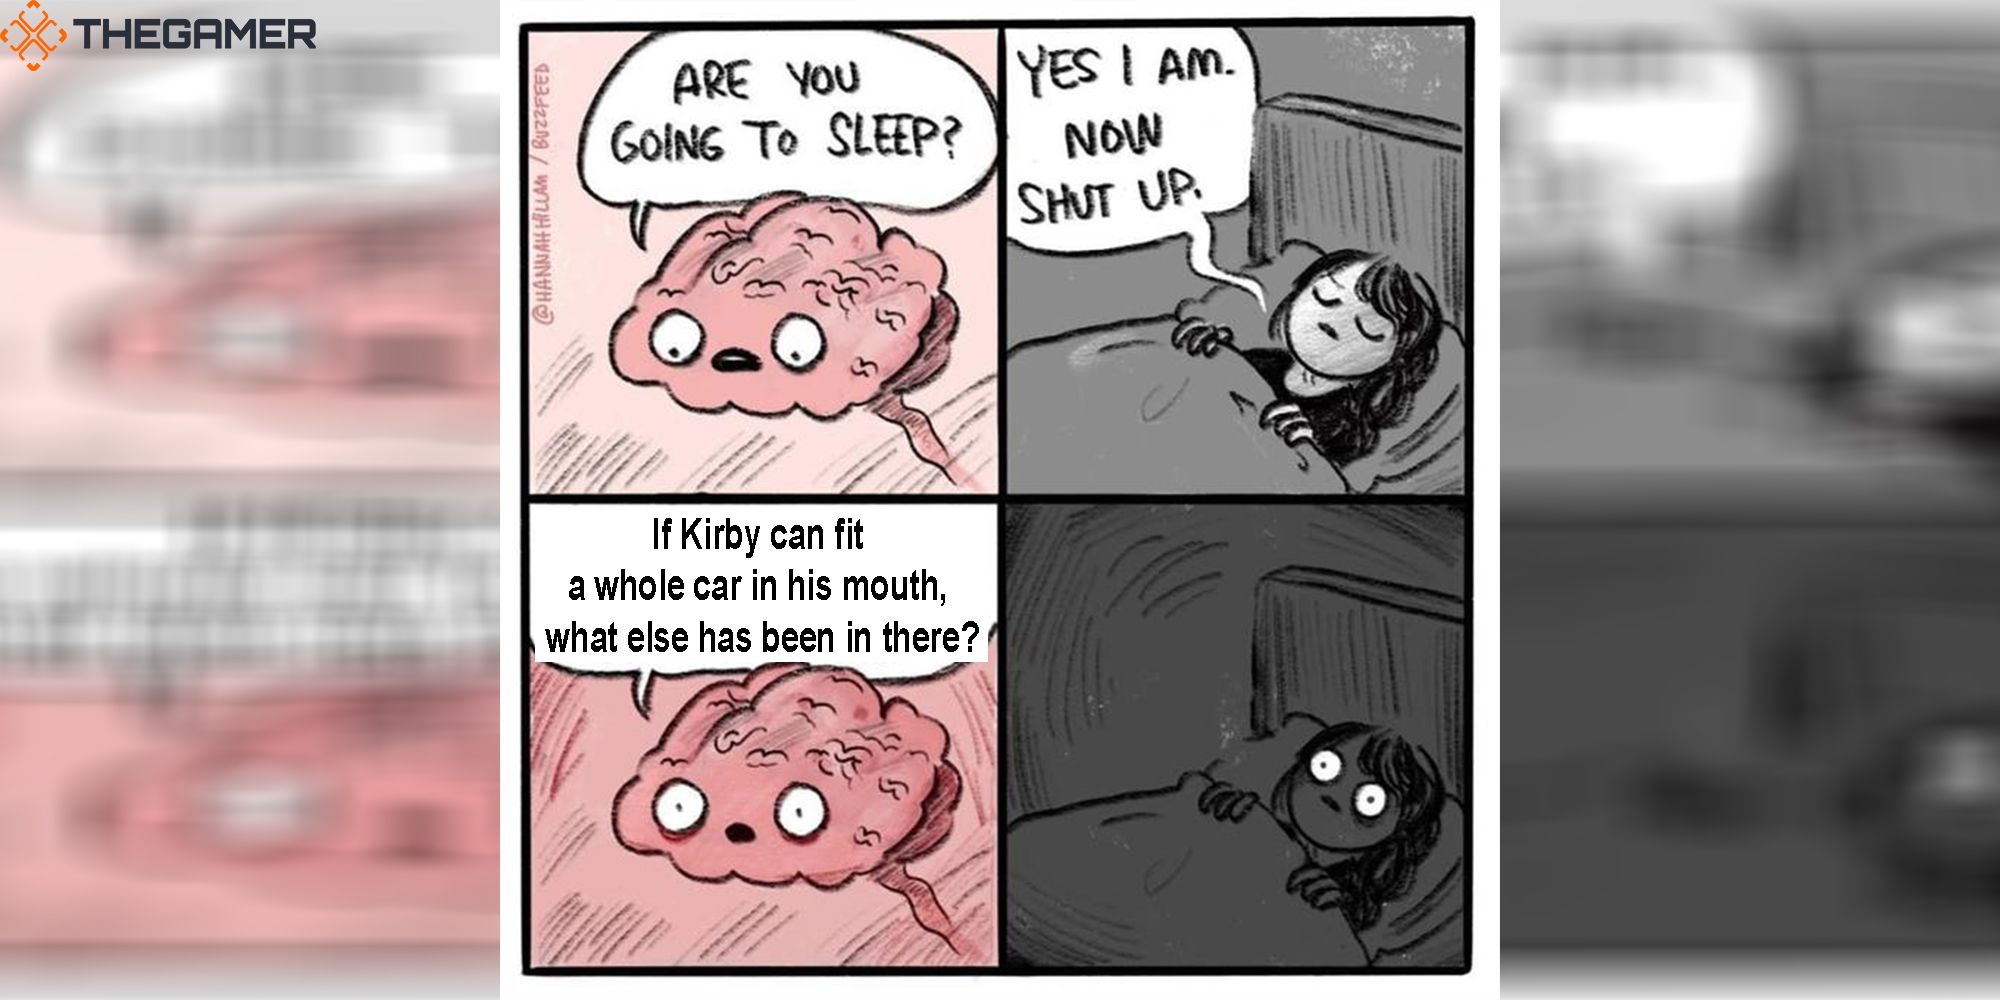 An active brain keeps an unsuspecting person awake with disturbing thoughts about Kirby's mouth.